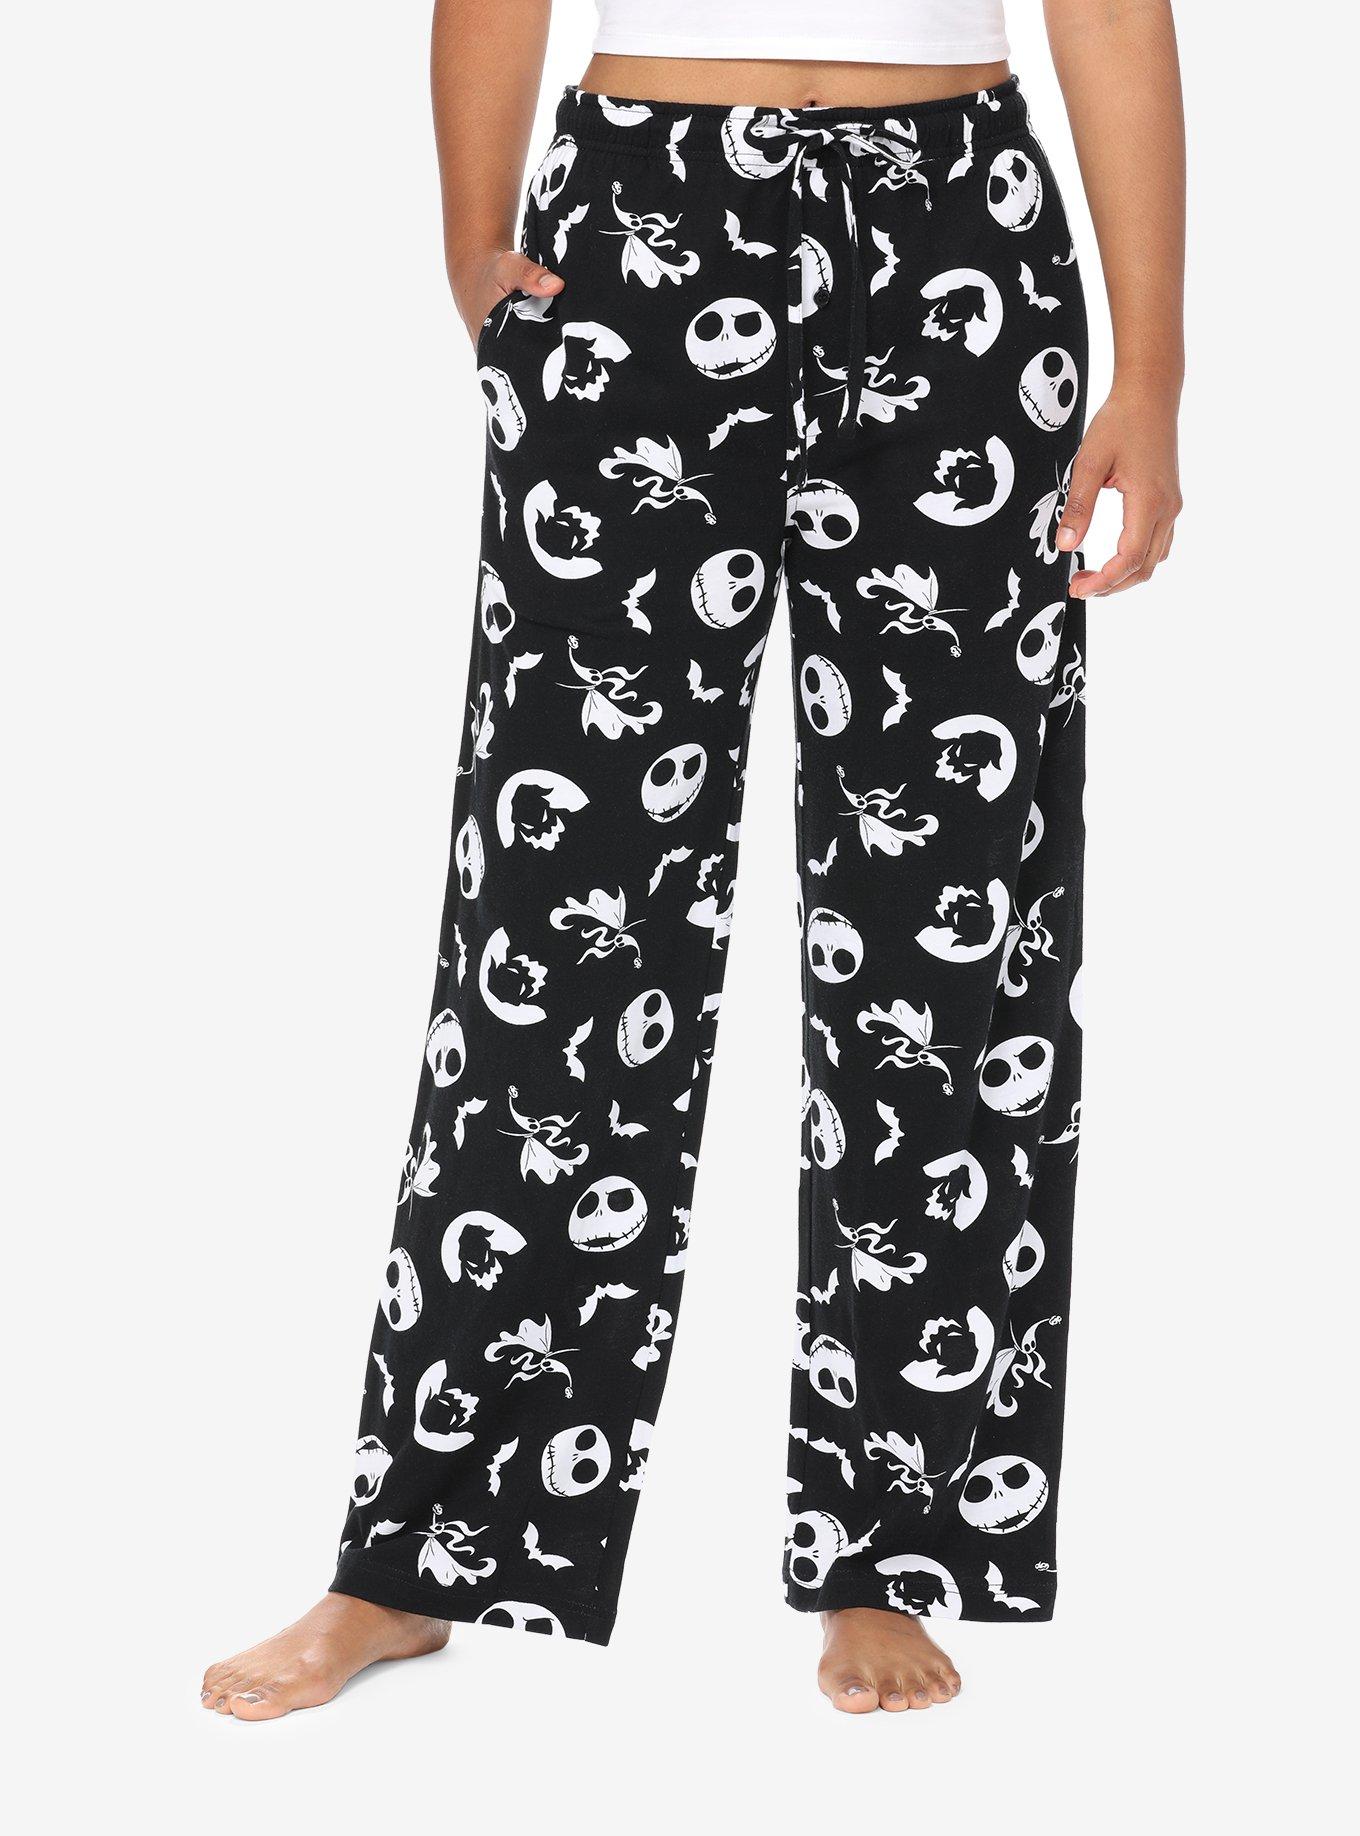 The Nightmare Before Christmas Characters Lounge Pants